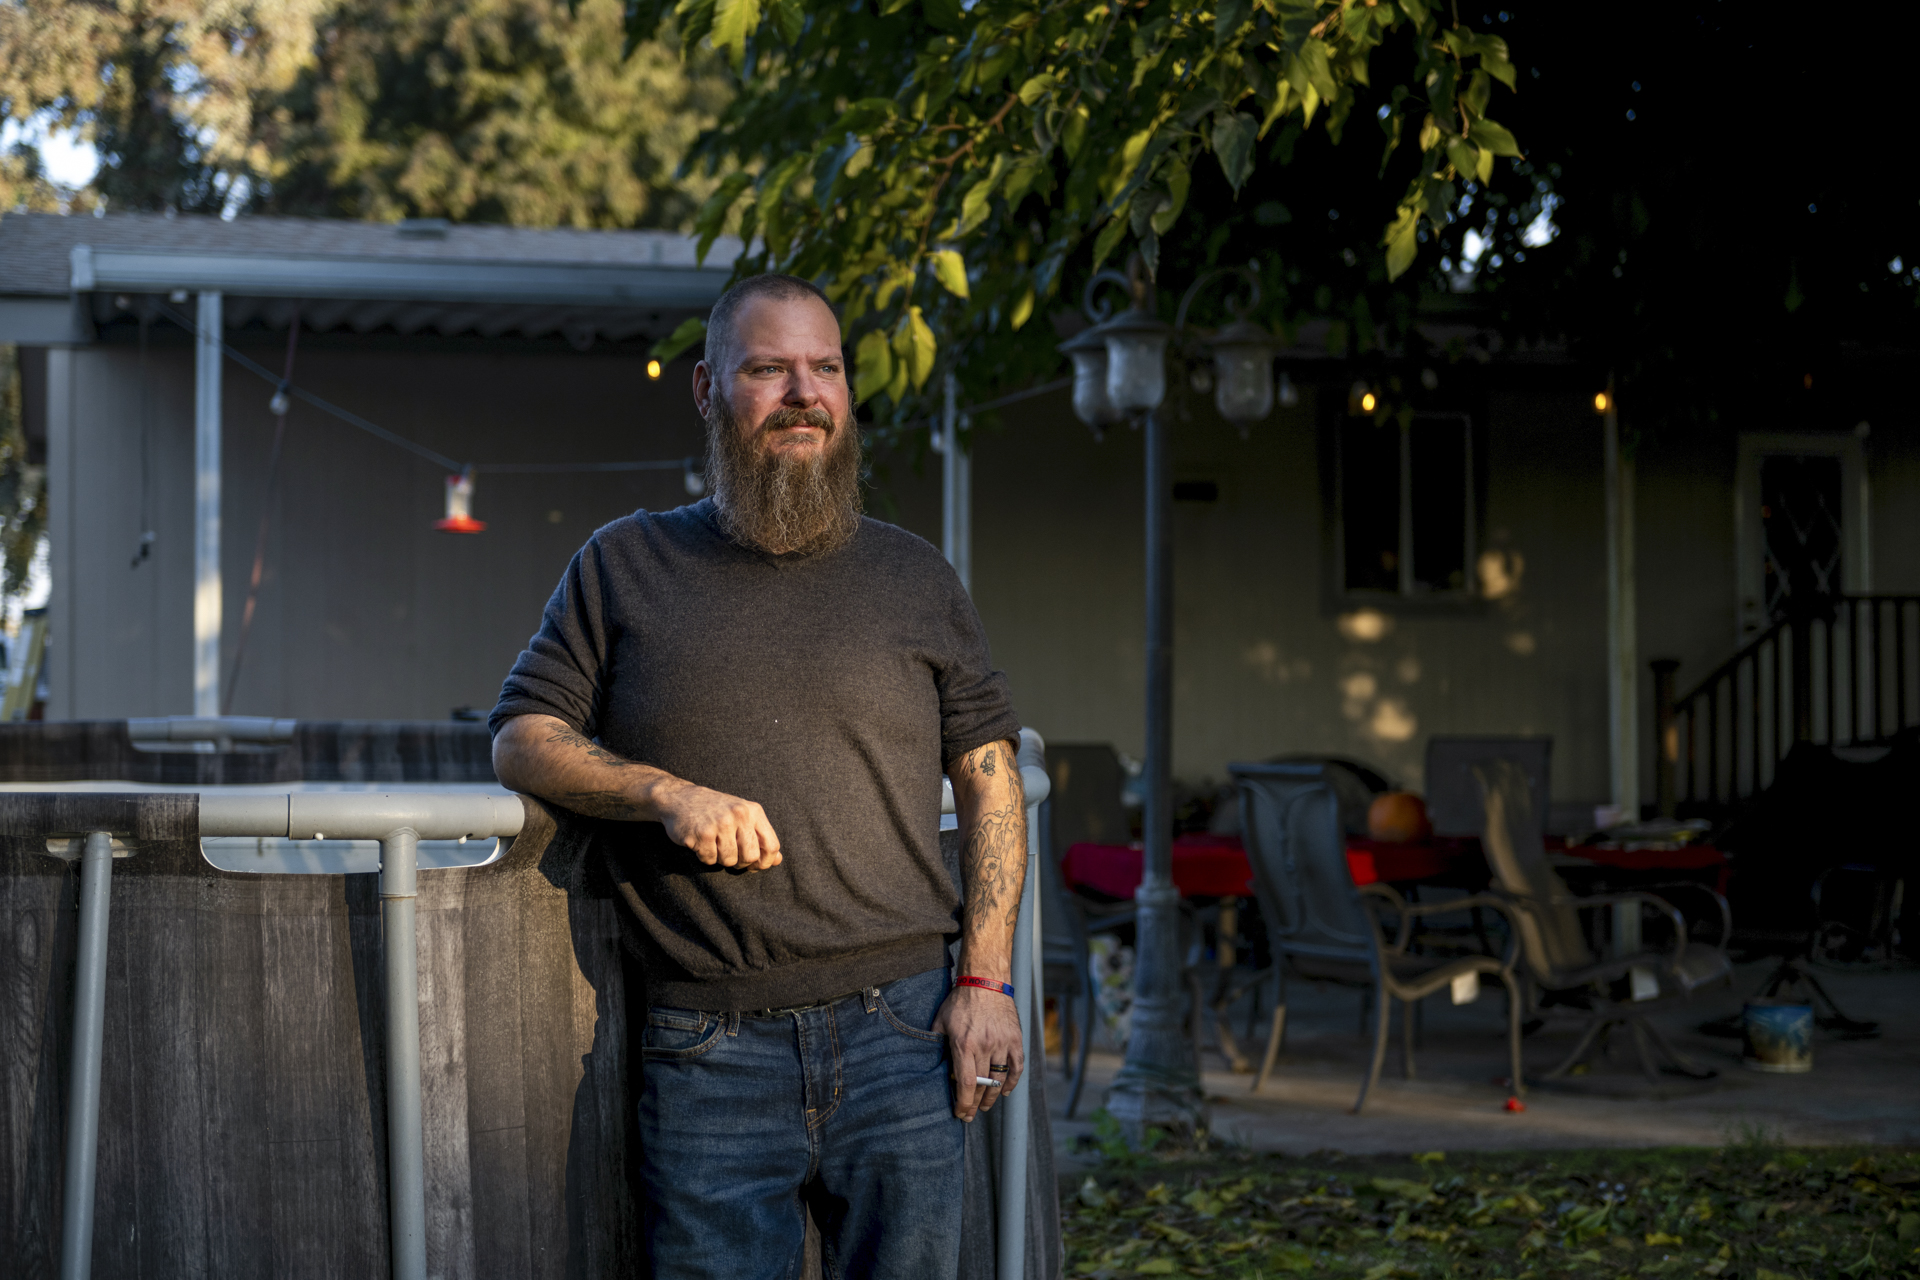 A white man with a long graying beard and shaved head leans against the edge of an above-ground swimming pool in the backyard of a home. He has tattoos on his arms and holds a cigarette in his left hands, and he wears baggy dark blue jeans and a dark gray sweatshirt.